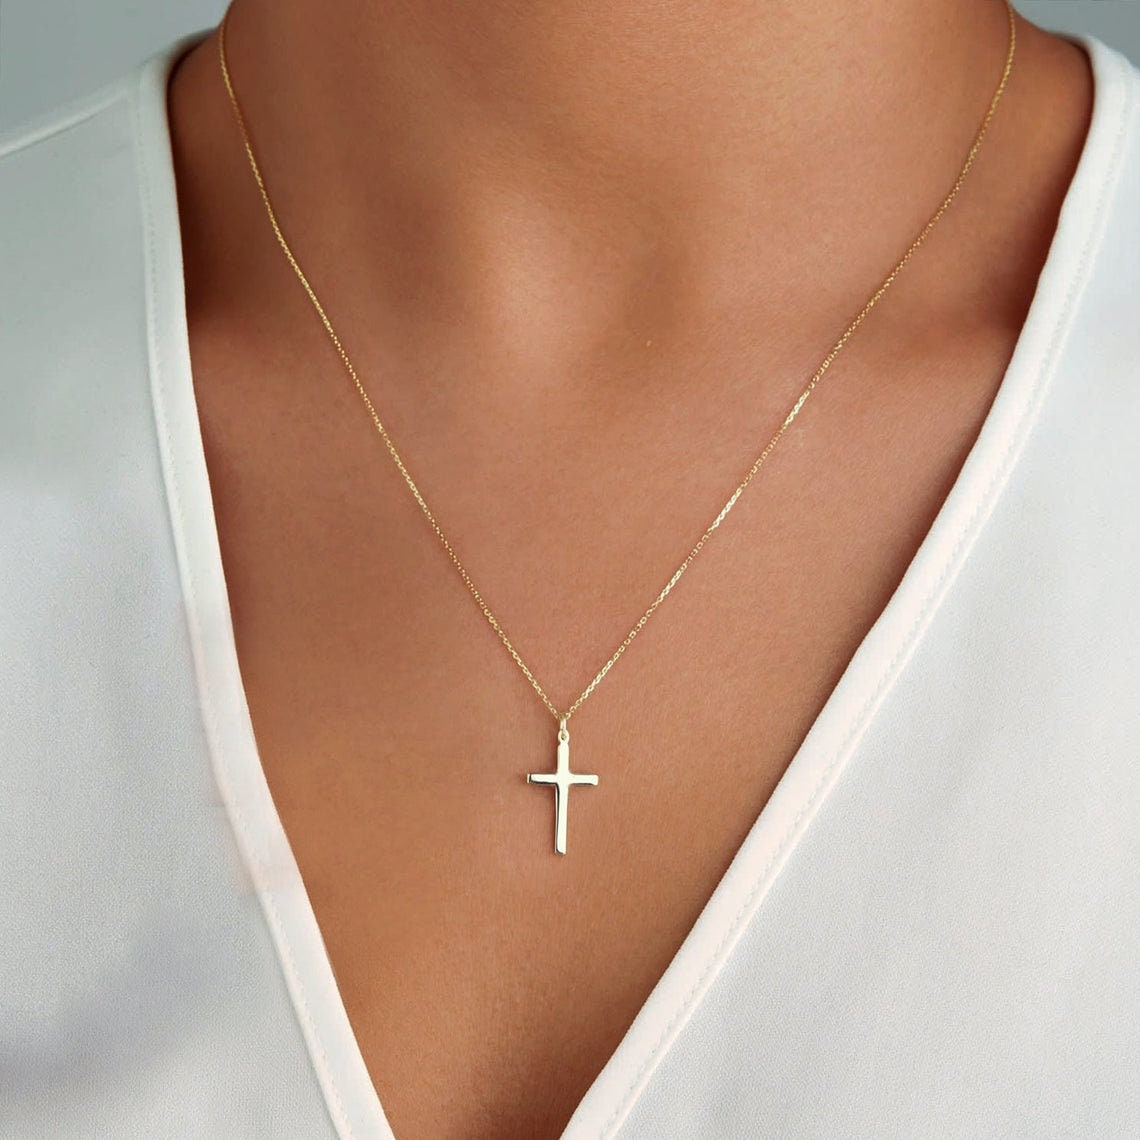 Small Stainless Steel Cross Pendant Necklace Silver Christian Gifts Women  Girls | eBay